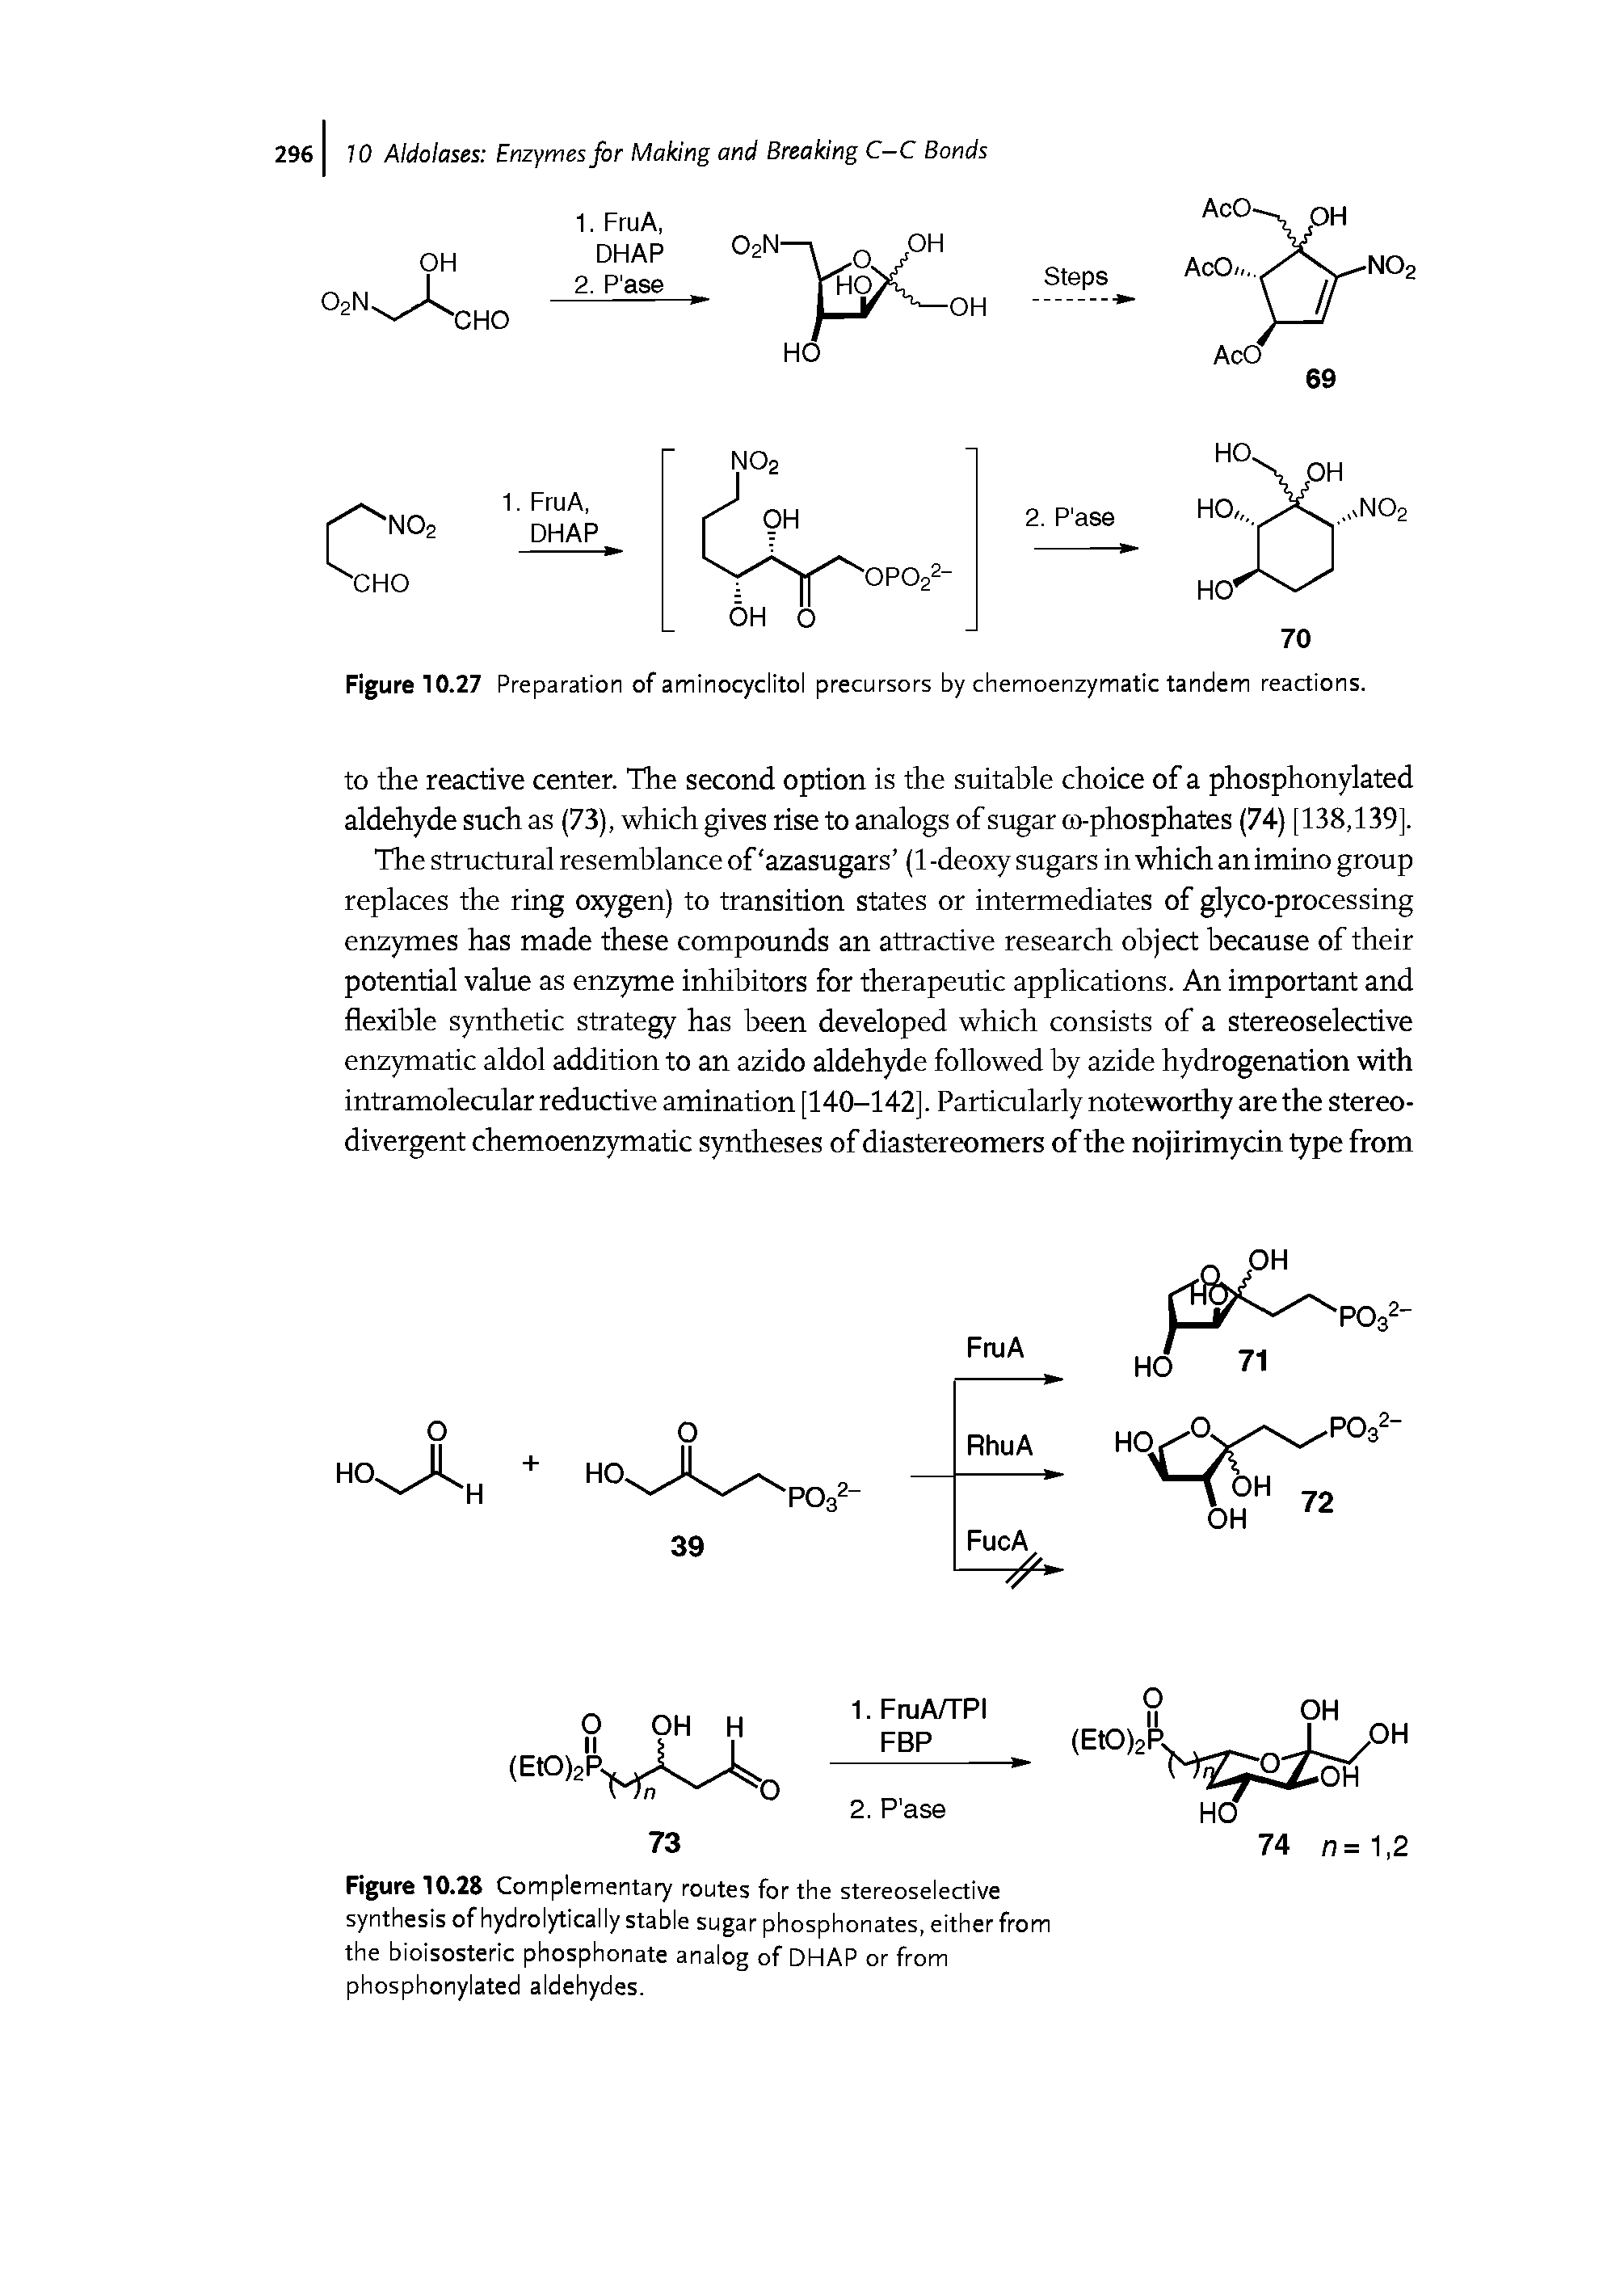 Figure 10.28 Complementary routes for the stereoselective synthesis of hydrolytically stable sugar phosphonates, either from the bioisosteric phosphonate analog of DHAP or from phosphonylated aldehydes.